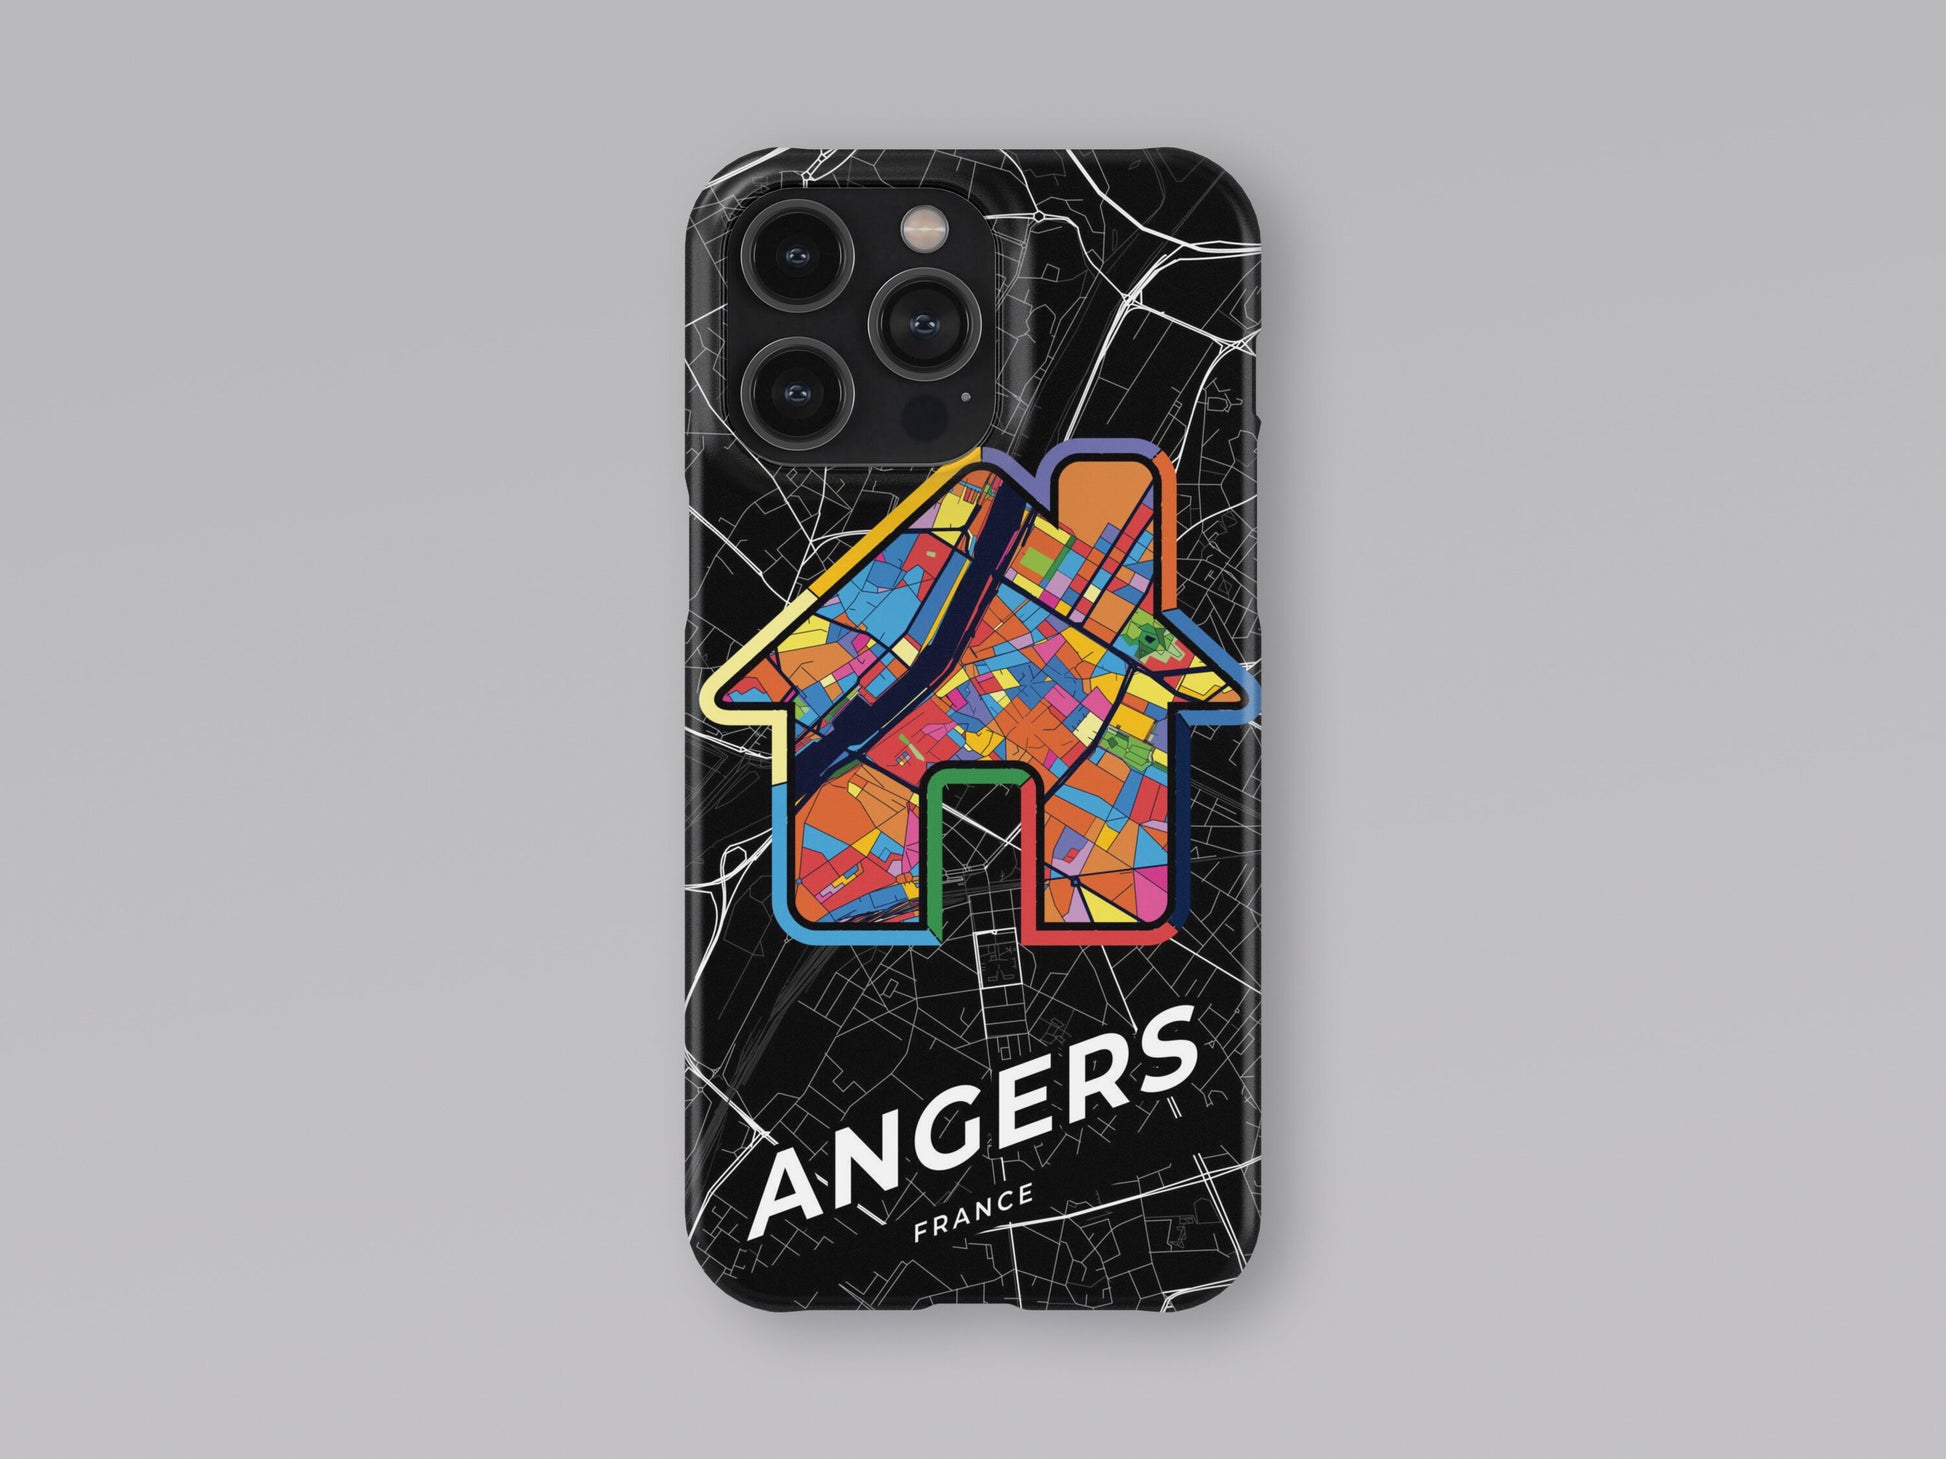 Angers France slim phone case with colorful icon. Birthday, wedding or housewarming gift. Couple match cases. 3